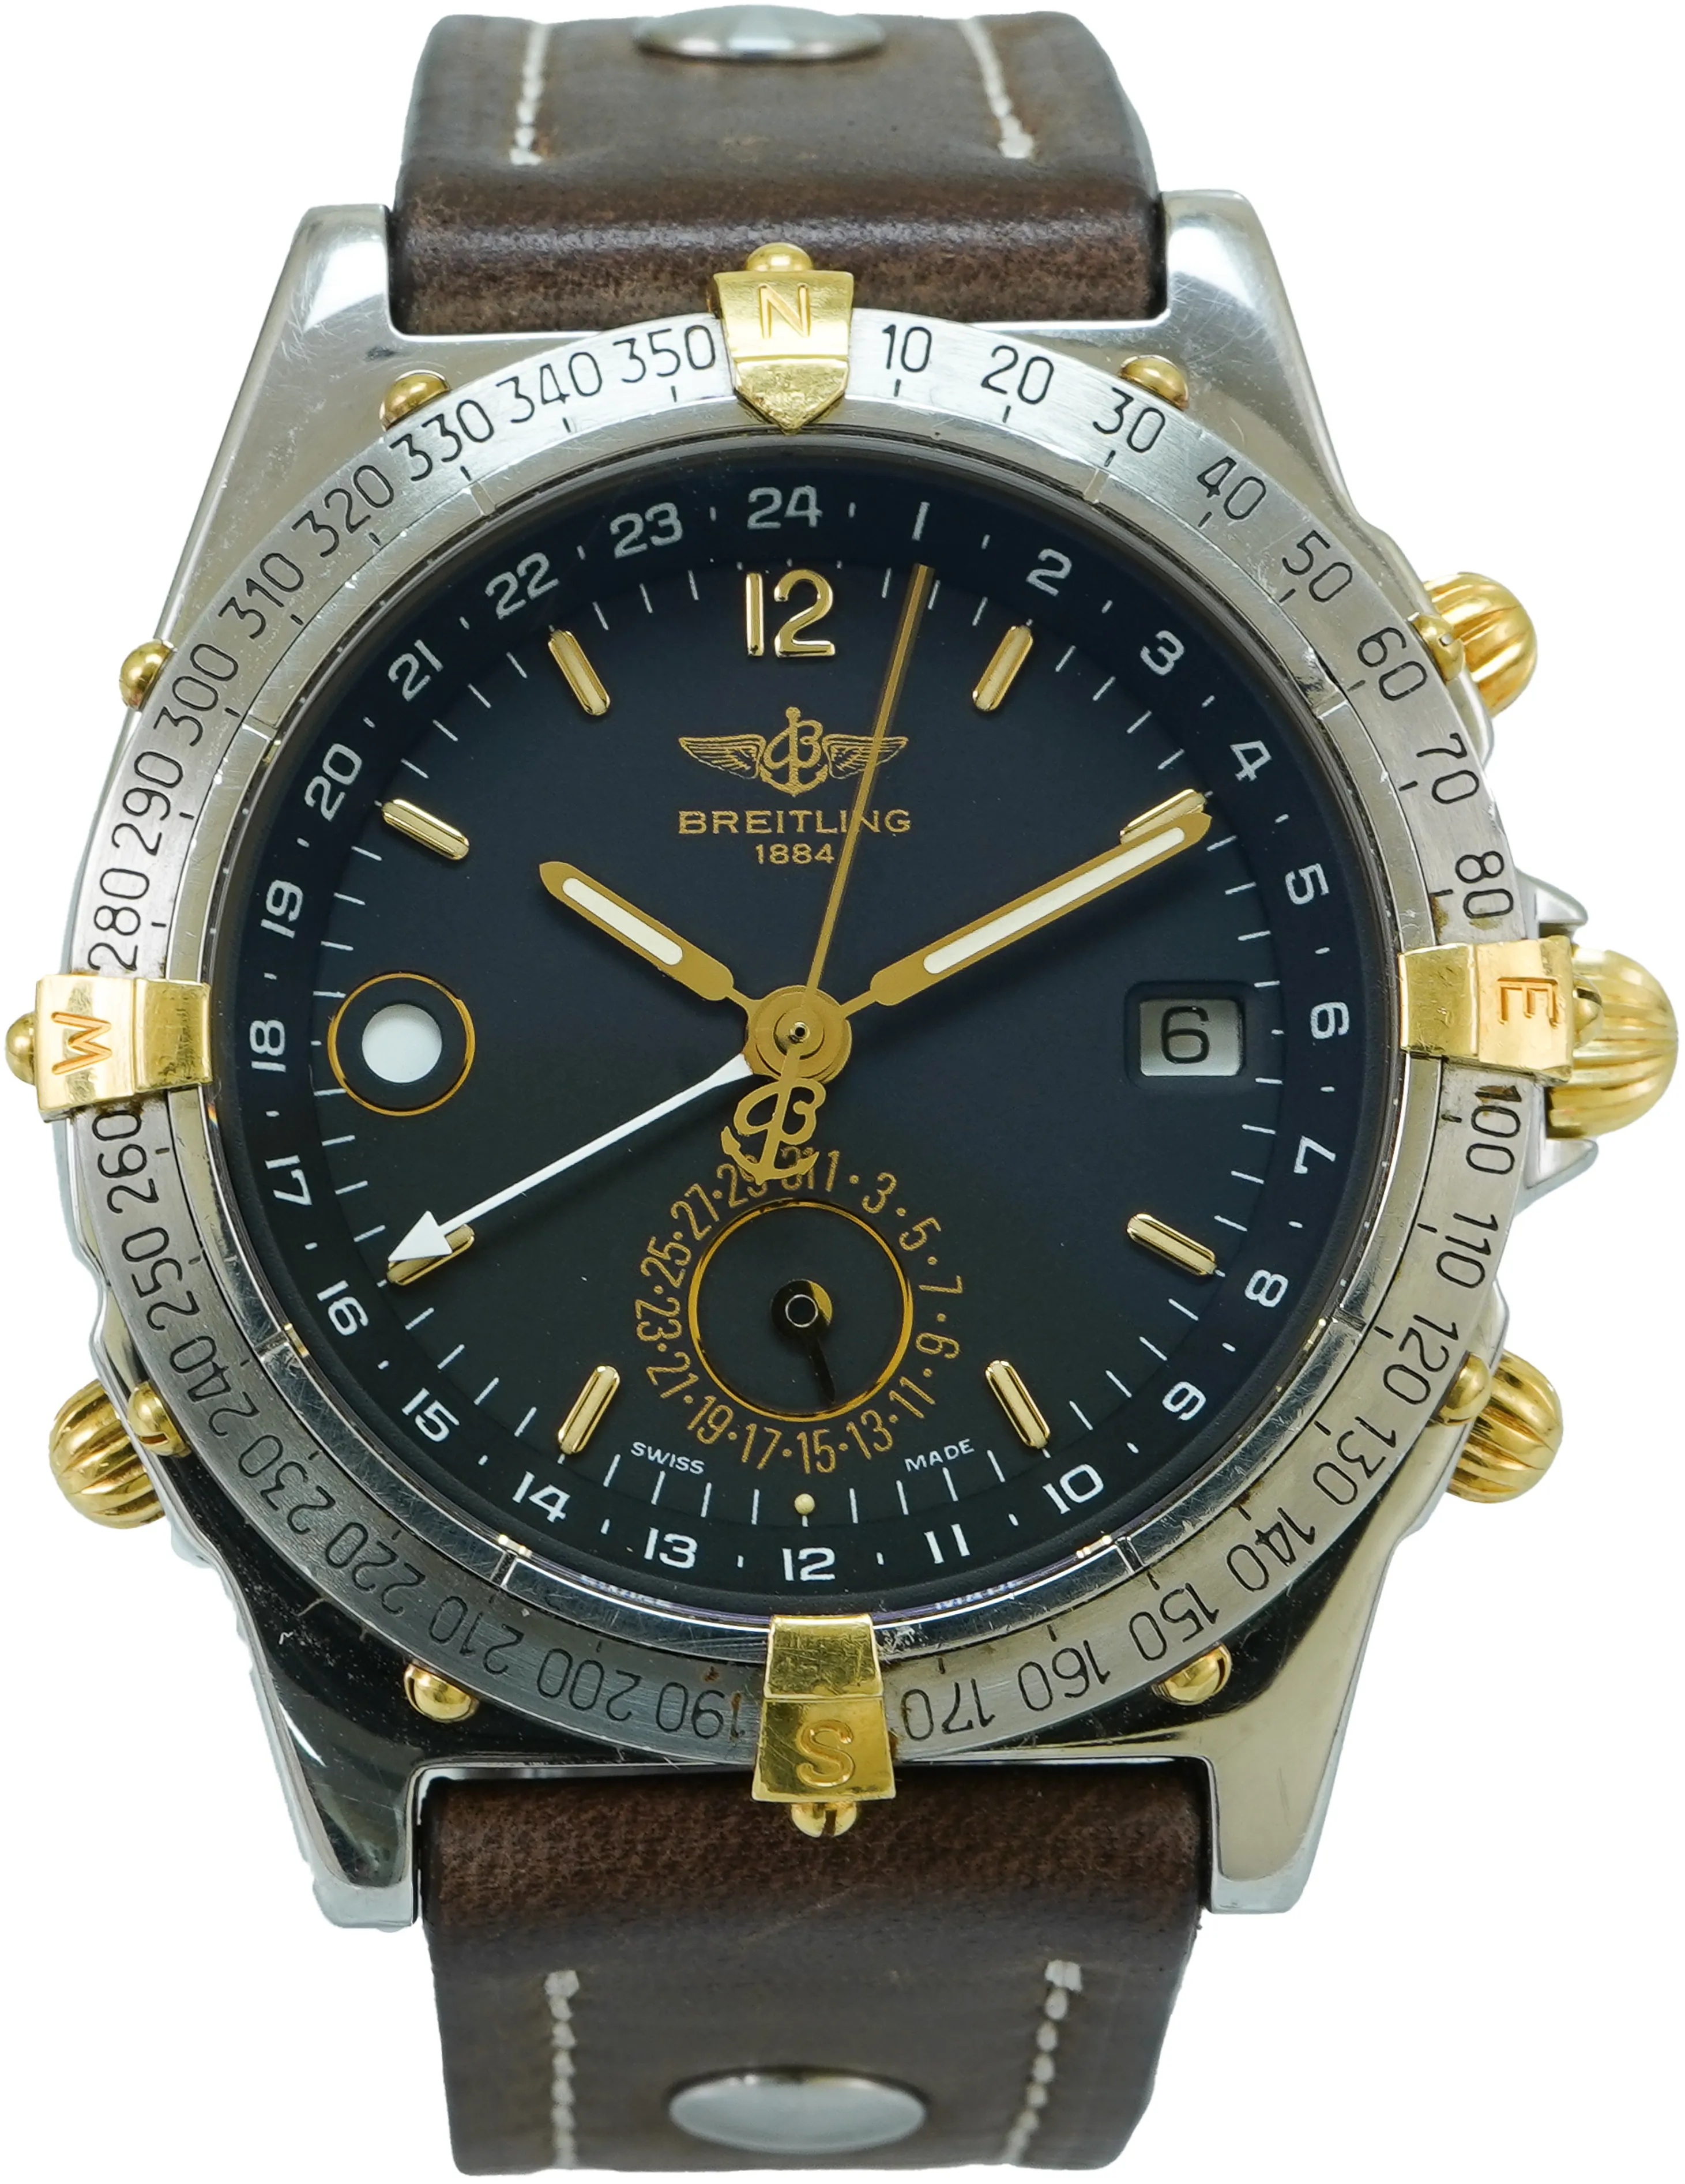 Breitling Windrider B15047 39mm Yellow gold and stainless steel